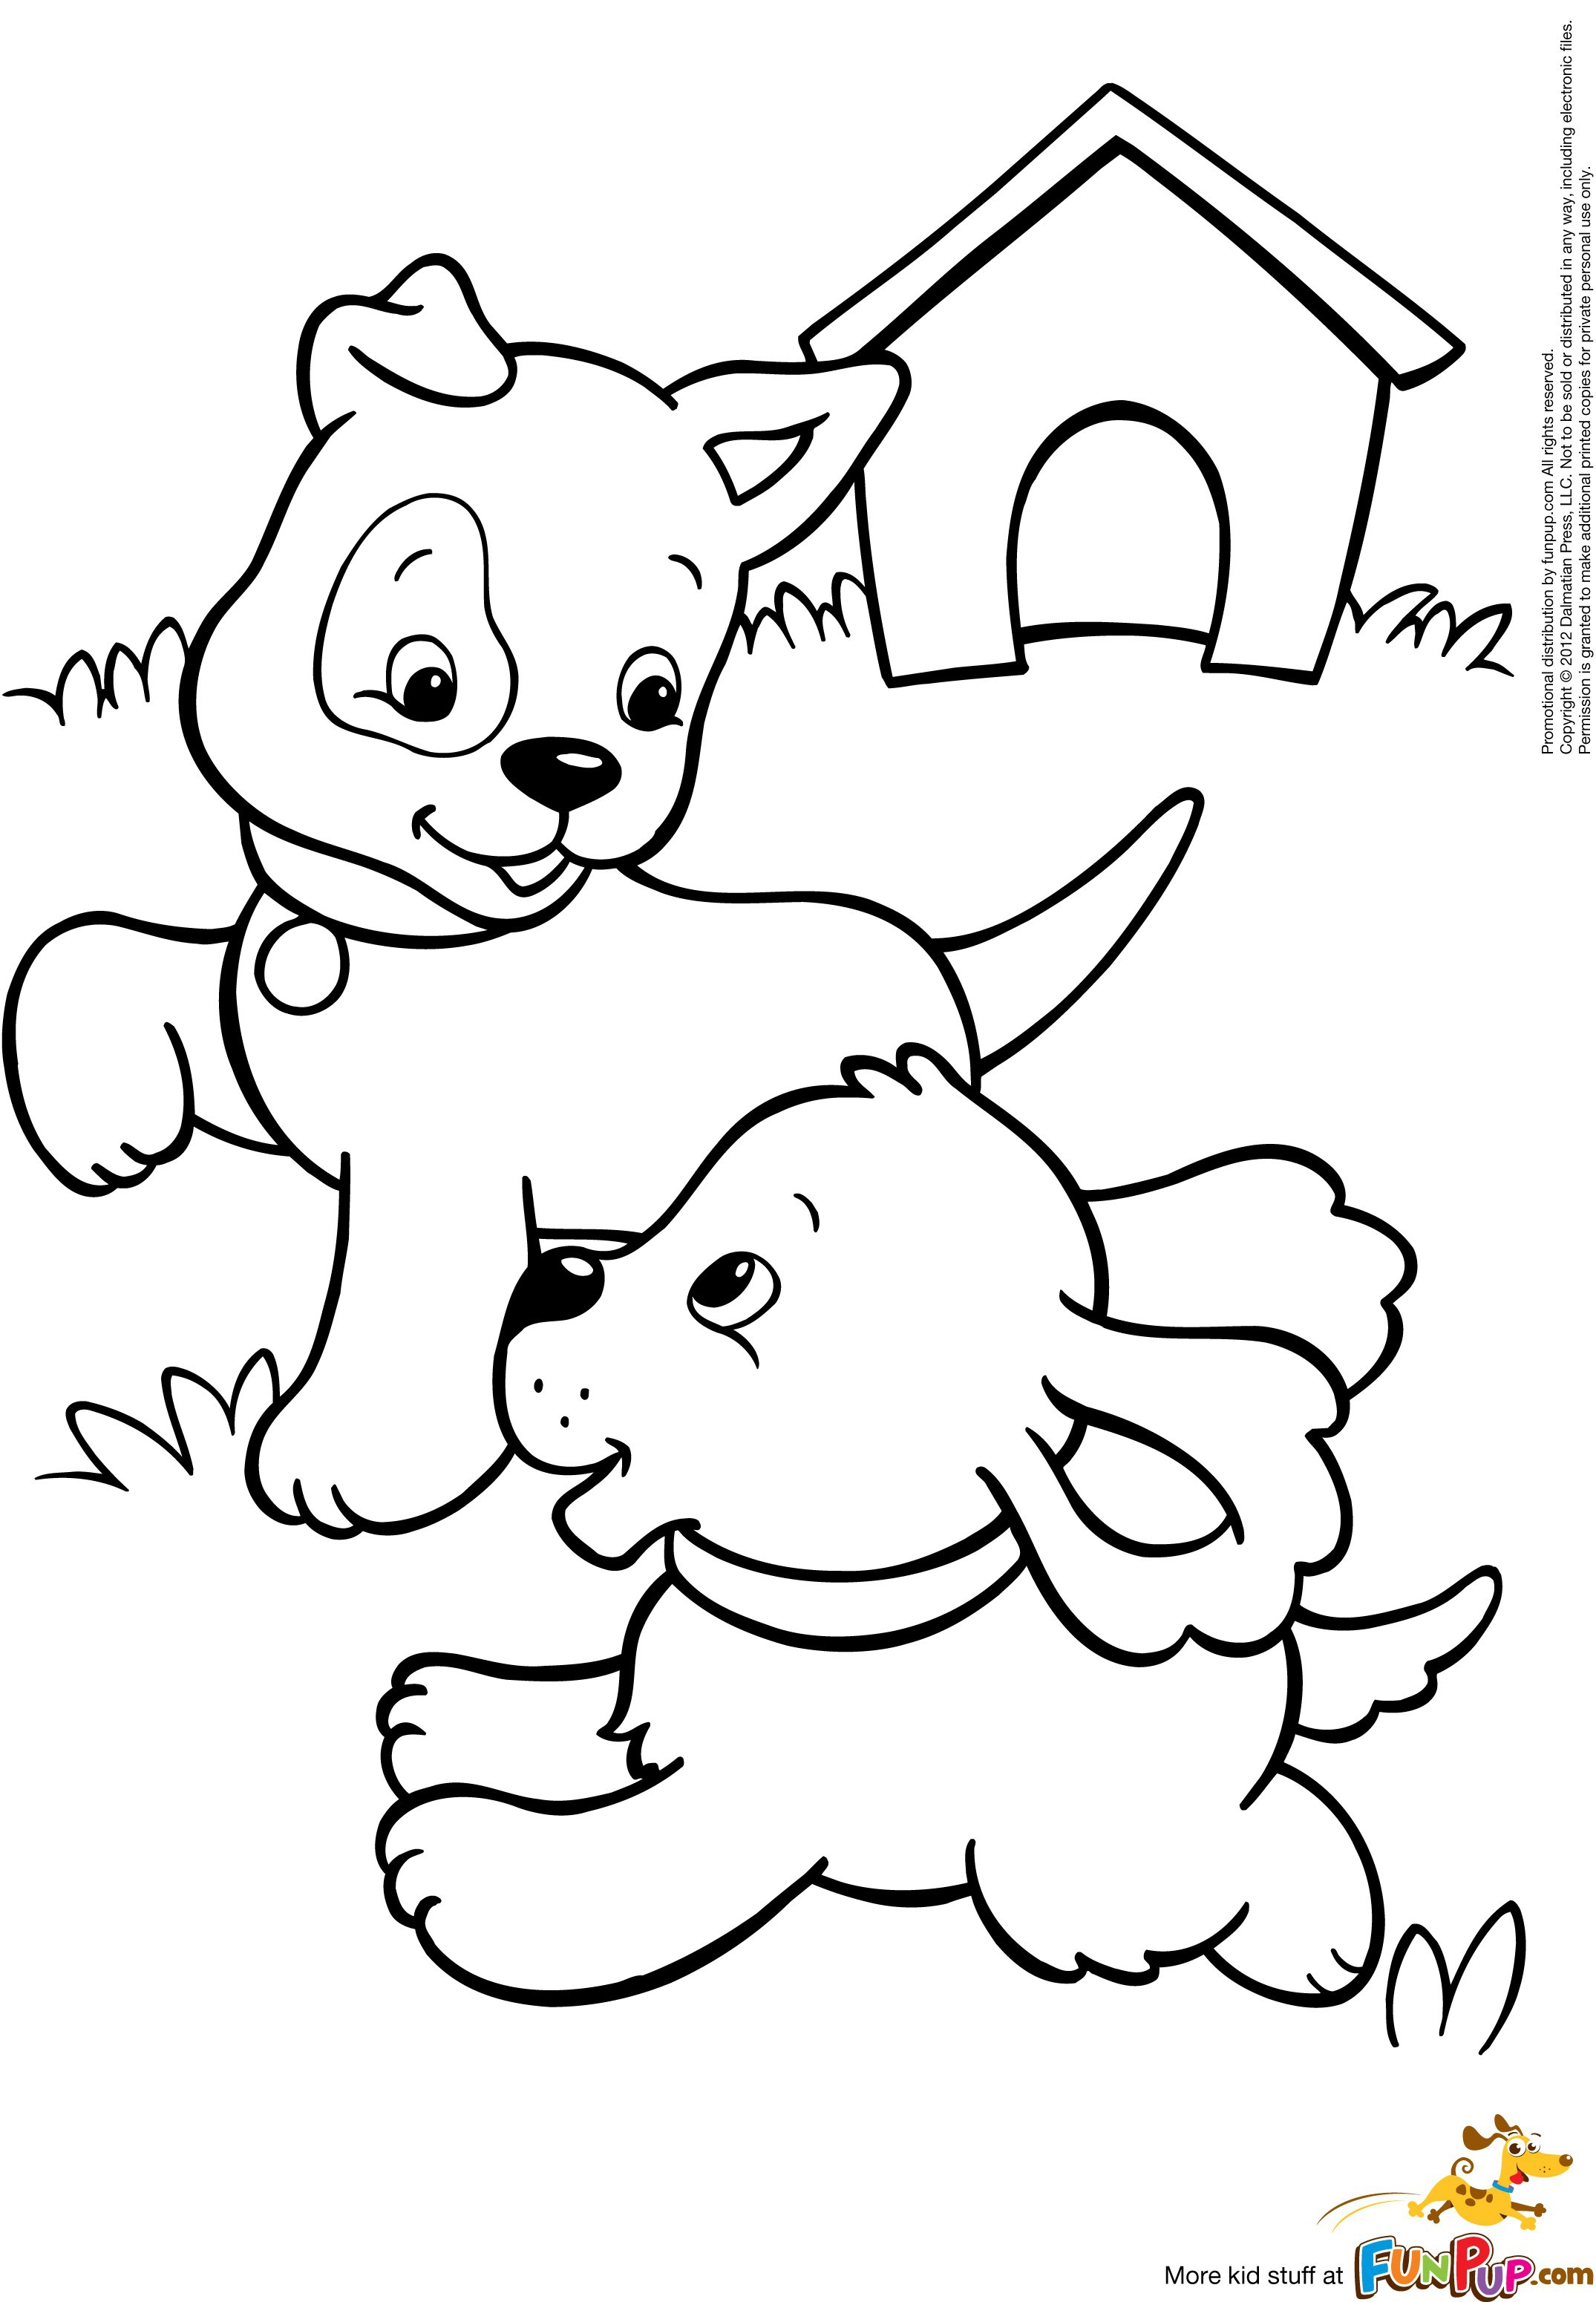 Coloring Pages Of Cute Dogs and Puppies Wallpaper